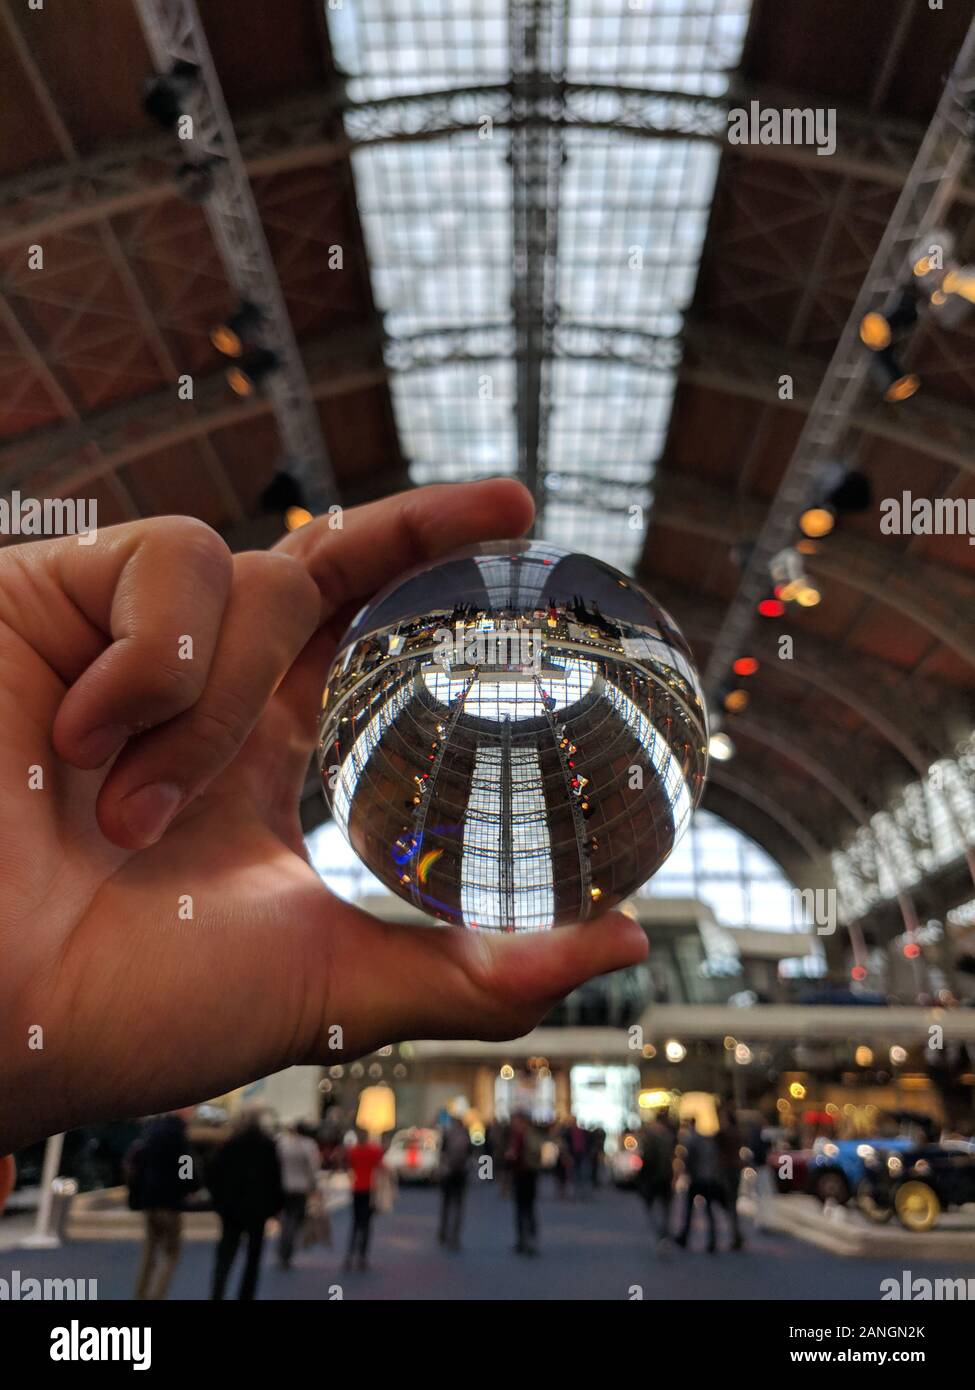 AUTOWORLD MUSEUM, BRUSSELS, January 2019, Man holding Lensball in hand at Autoworld museum Stock Photo